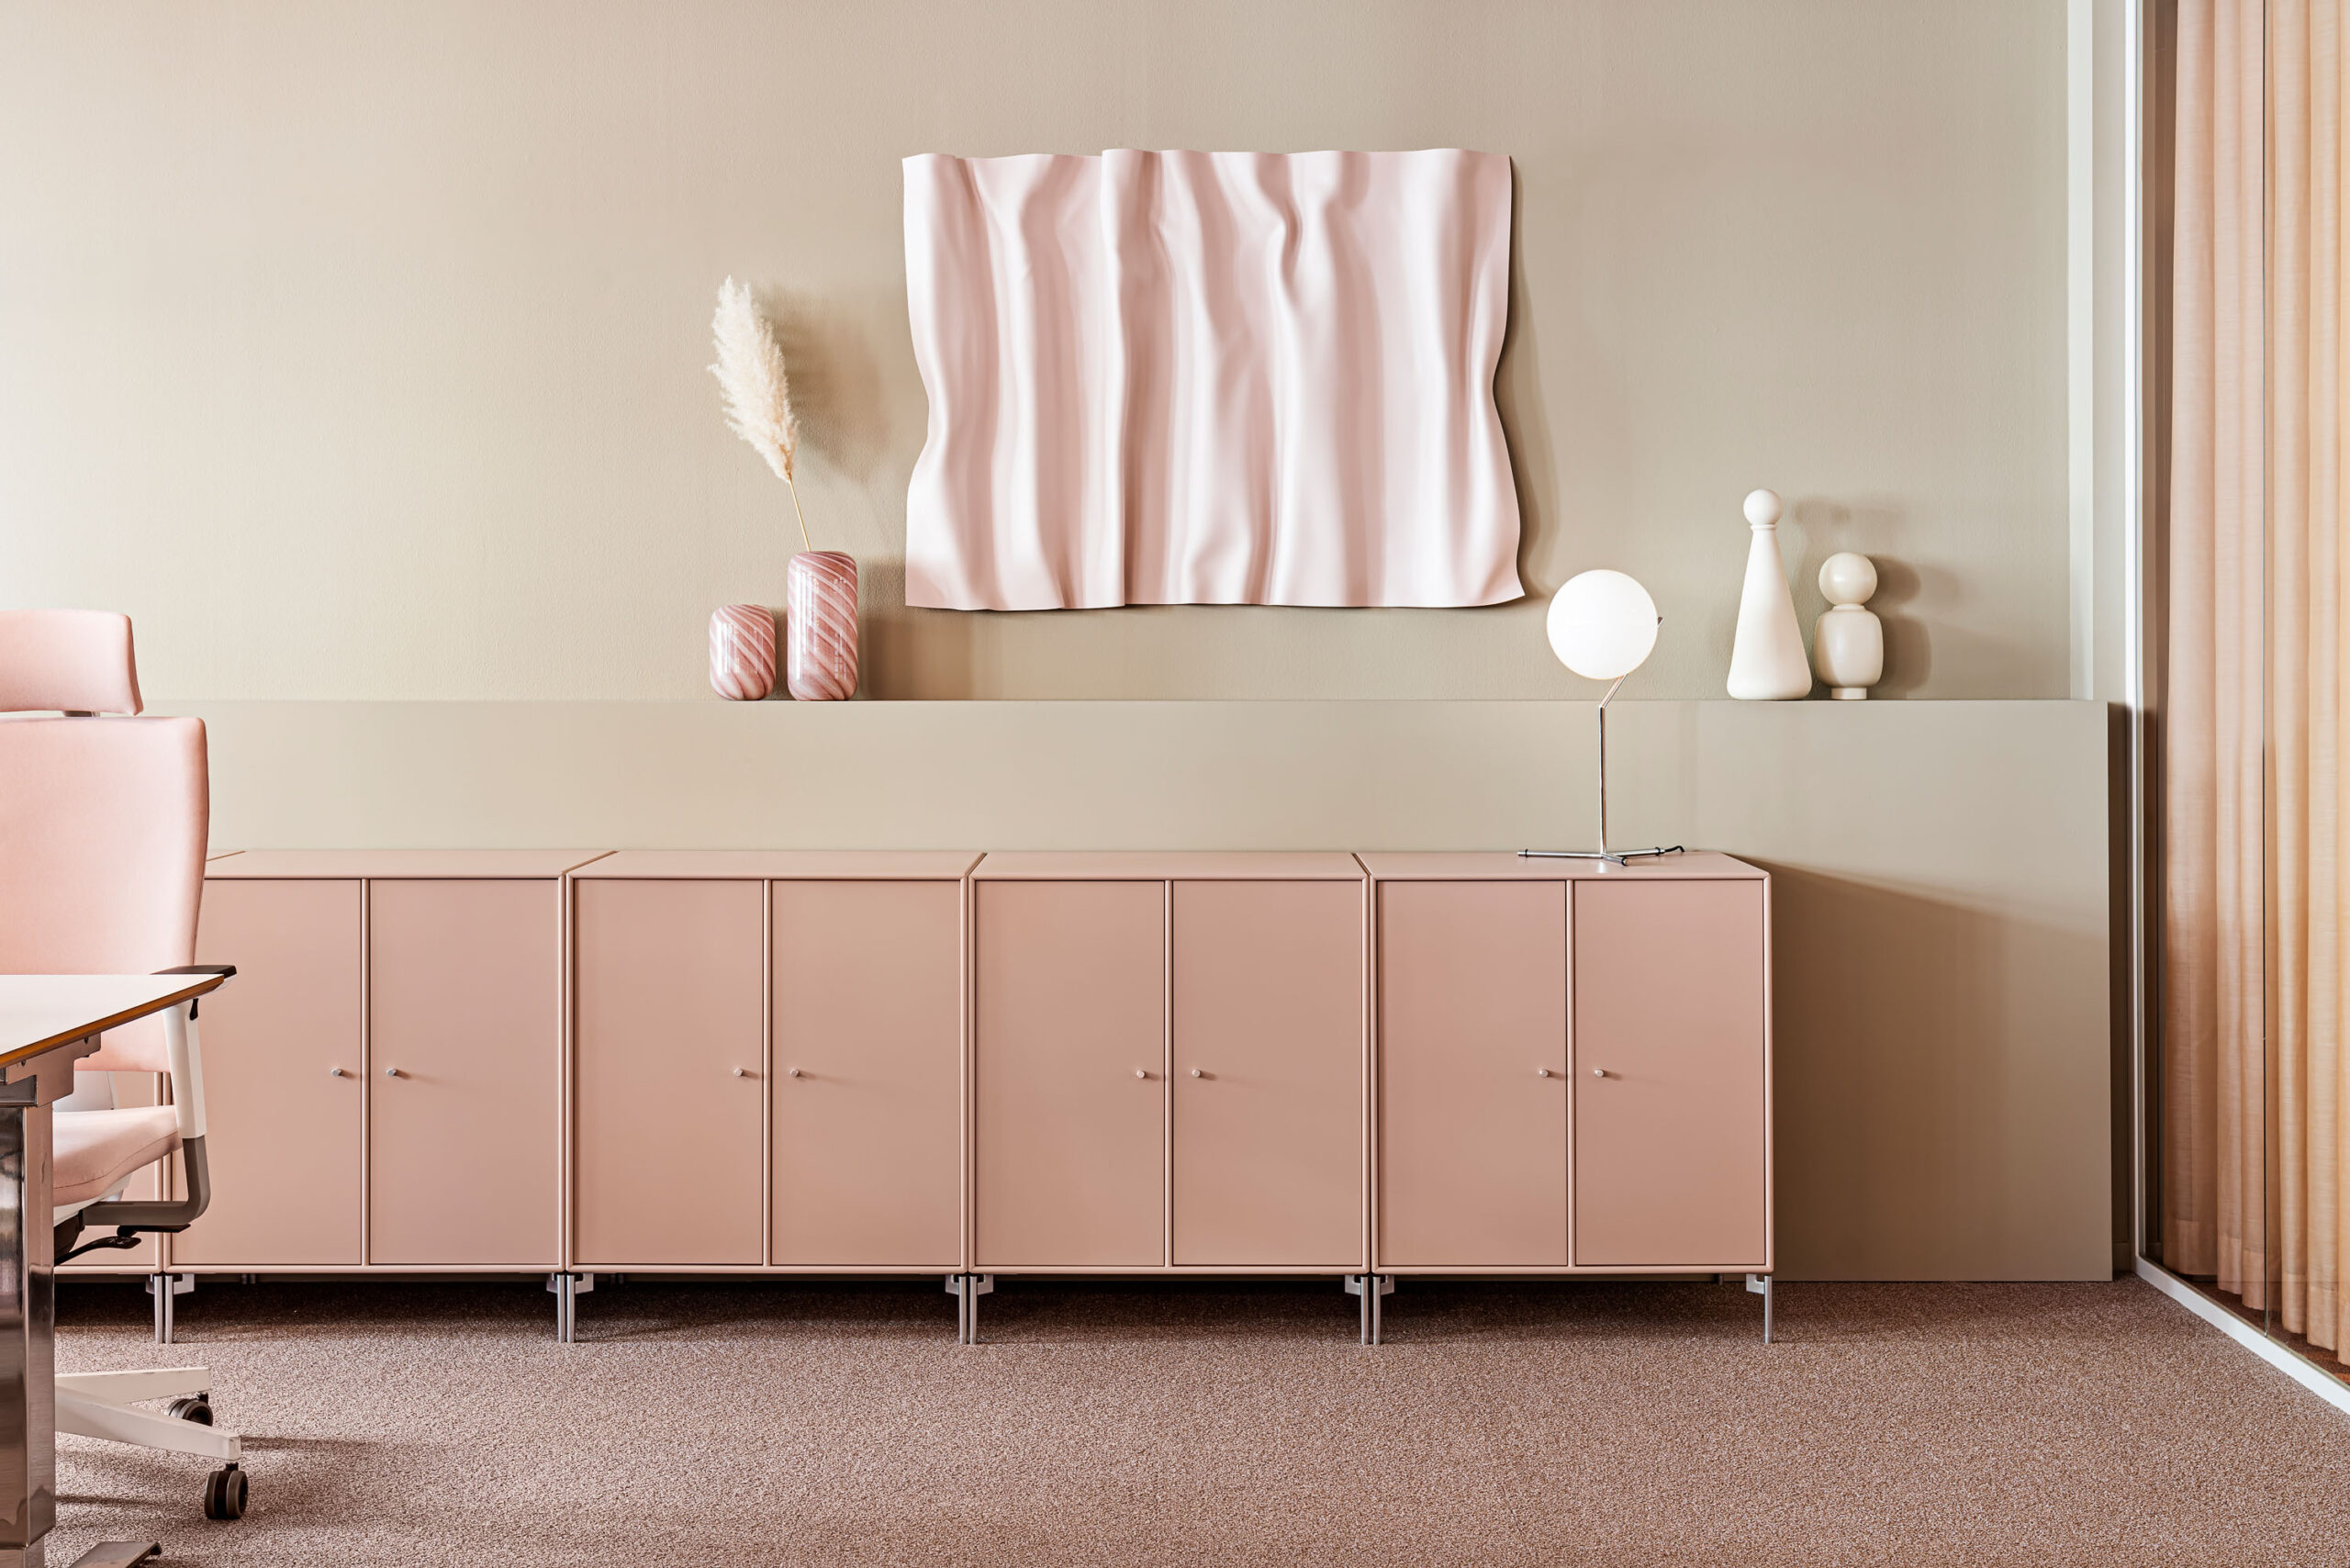 Office interior for Saether, with an open plan layout in beige and pink. A view towards a wall where the color scheme is beige, with interior details in different shades of pink. Cabinets, office chairs, vases, a painting, curtains, and a lamp in various shades of pink.